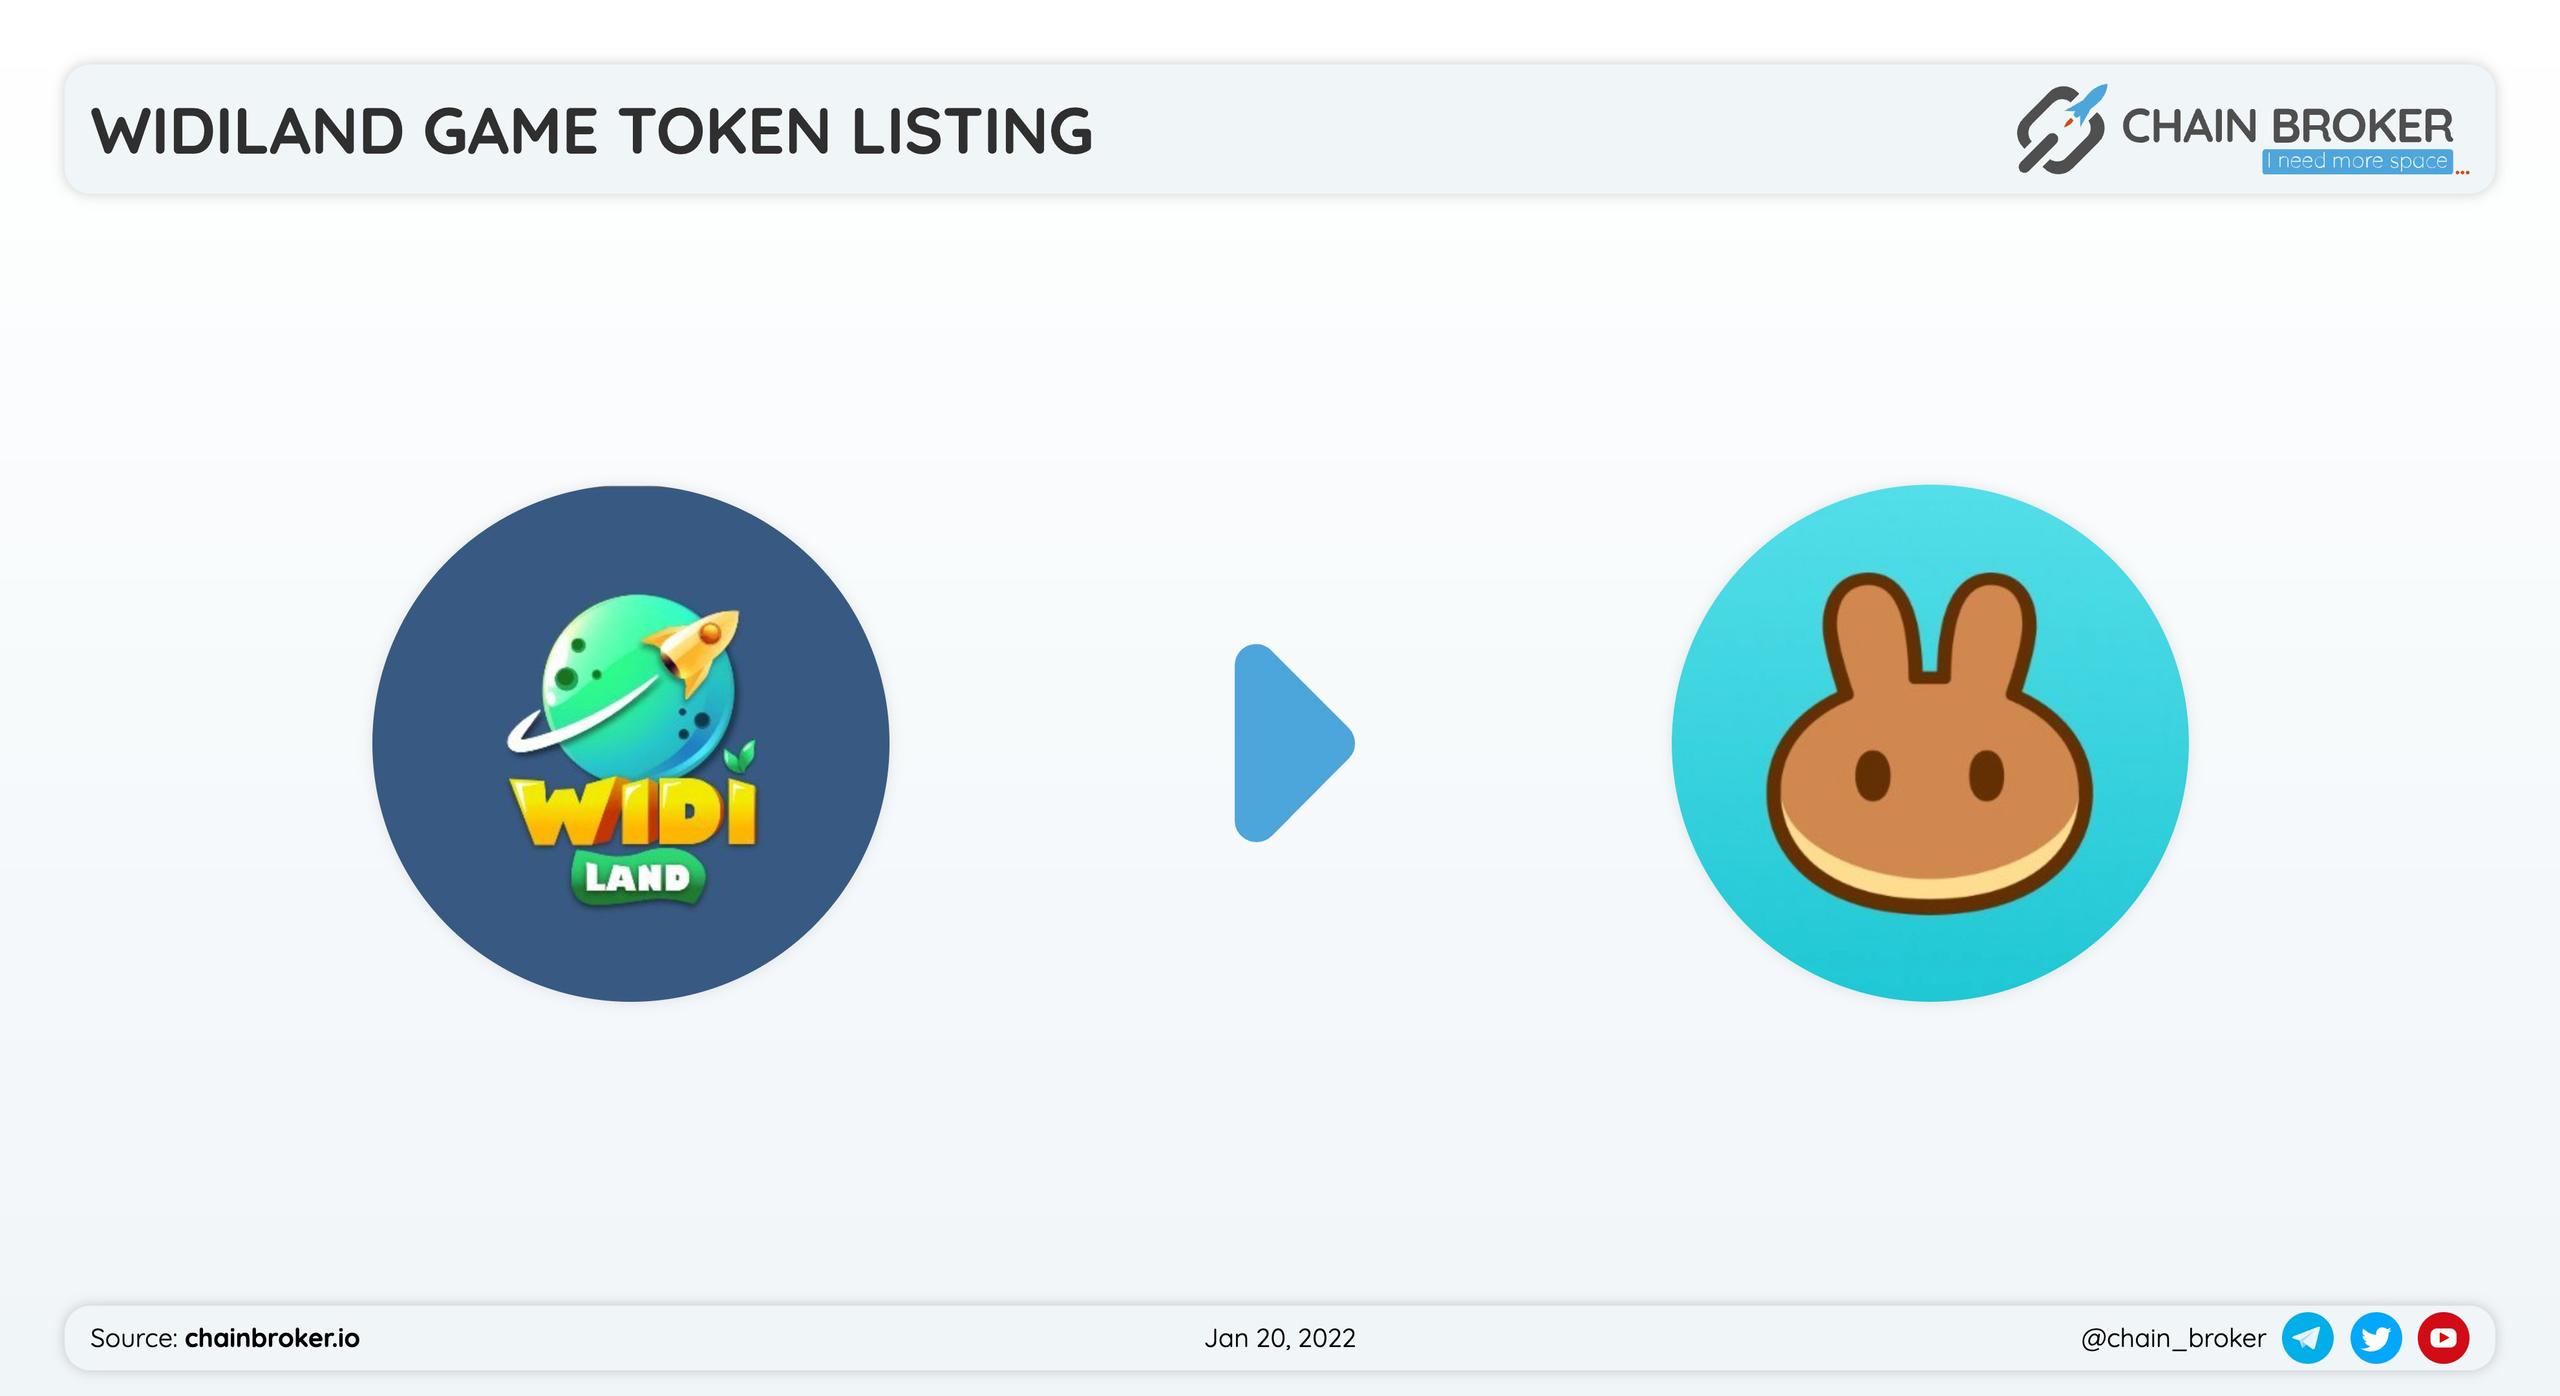 WidiLand has partnered with PancakeSwap for a token listing.